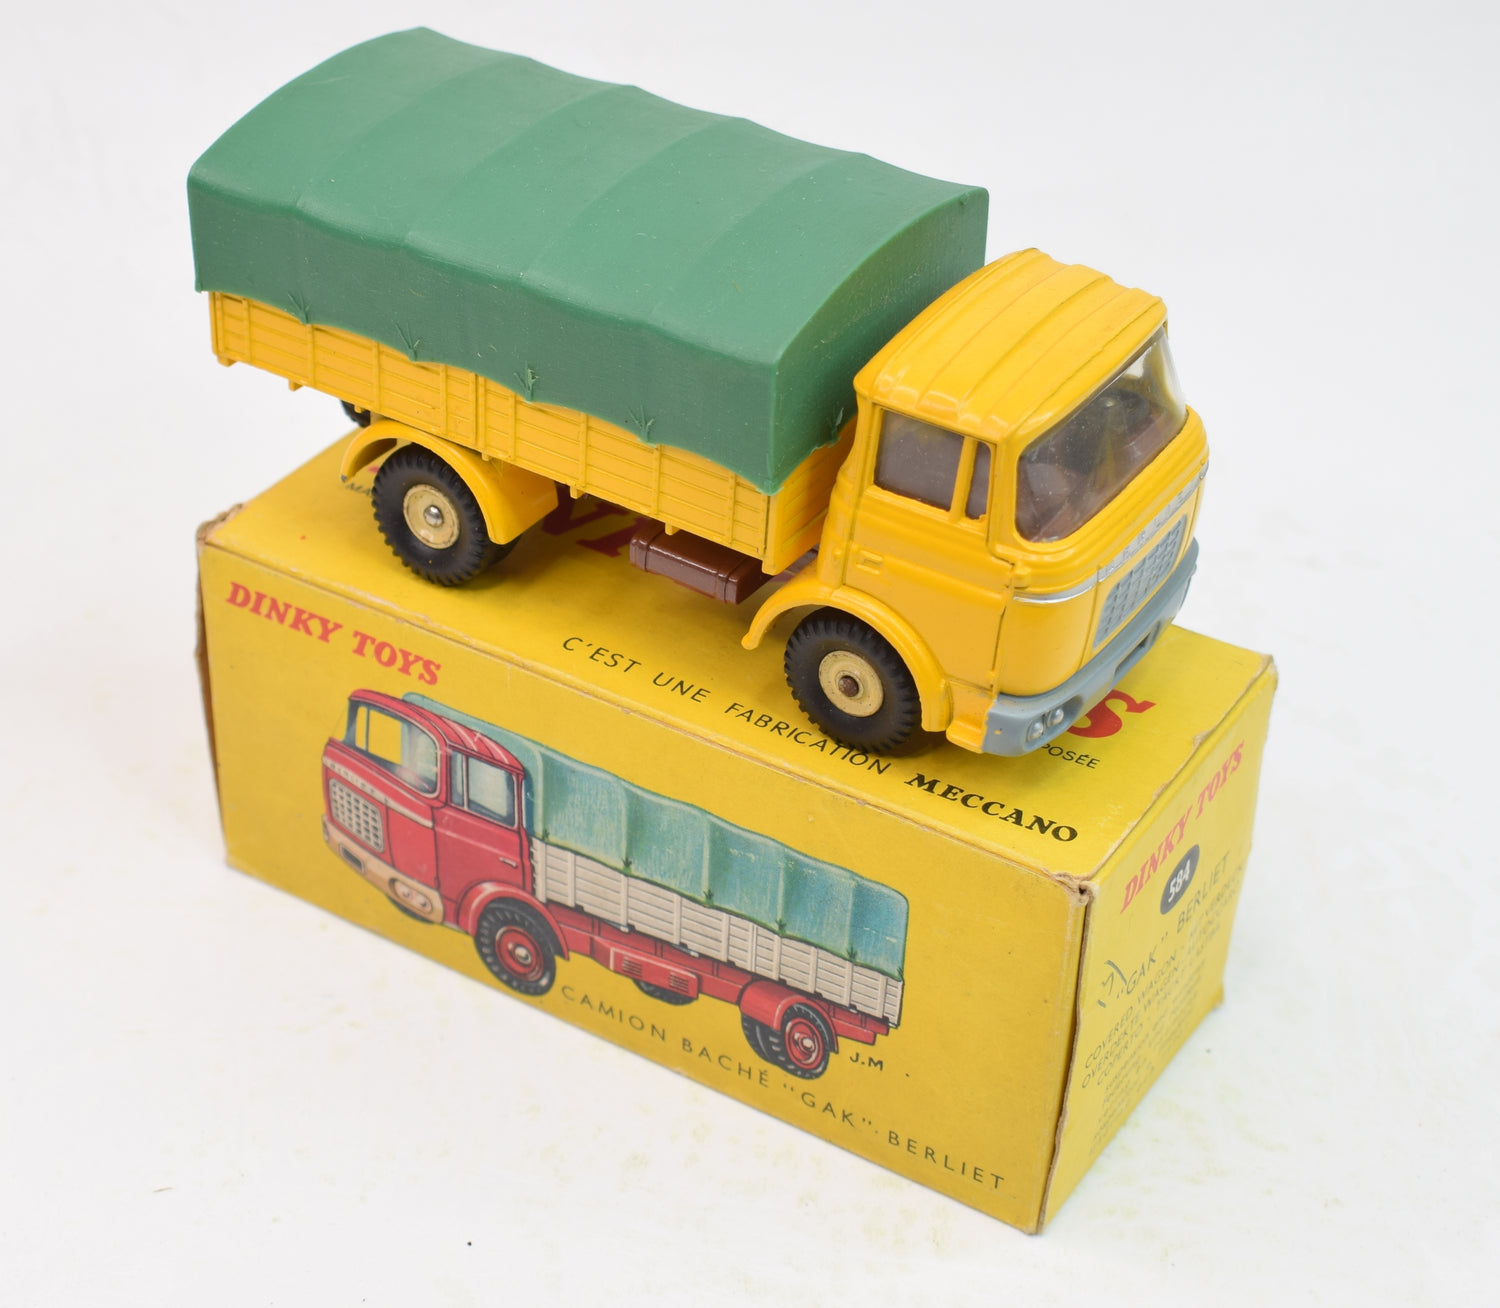 French Dinky 584 Camion Bache 'GAK' Berliet truck Virtually Mint/Boxed 'Brecon' Collection Part 2